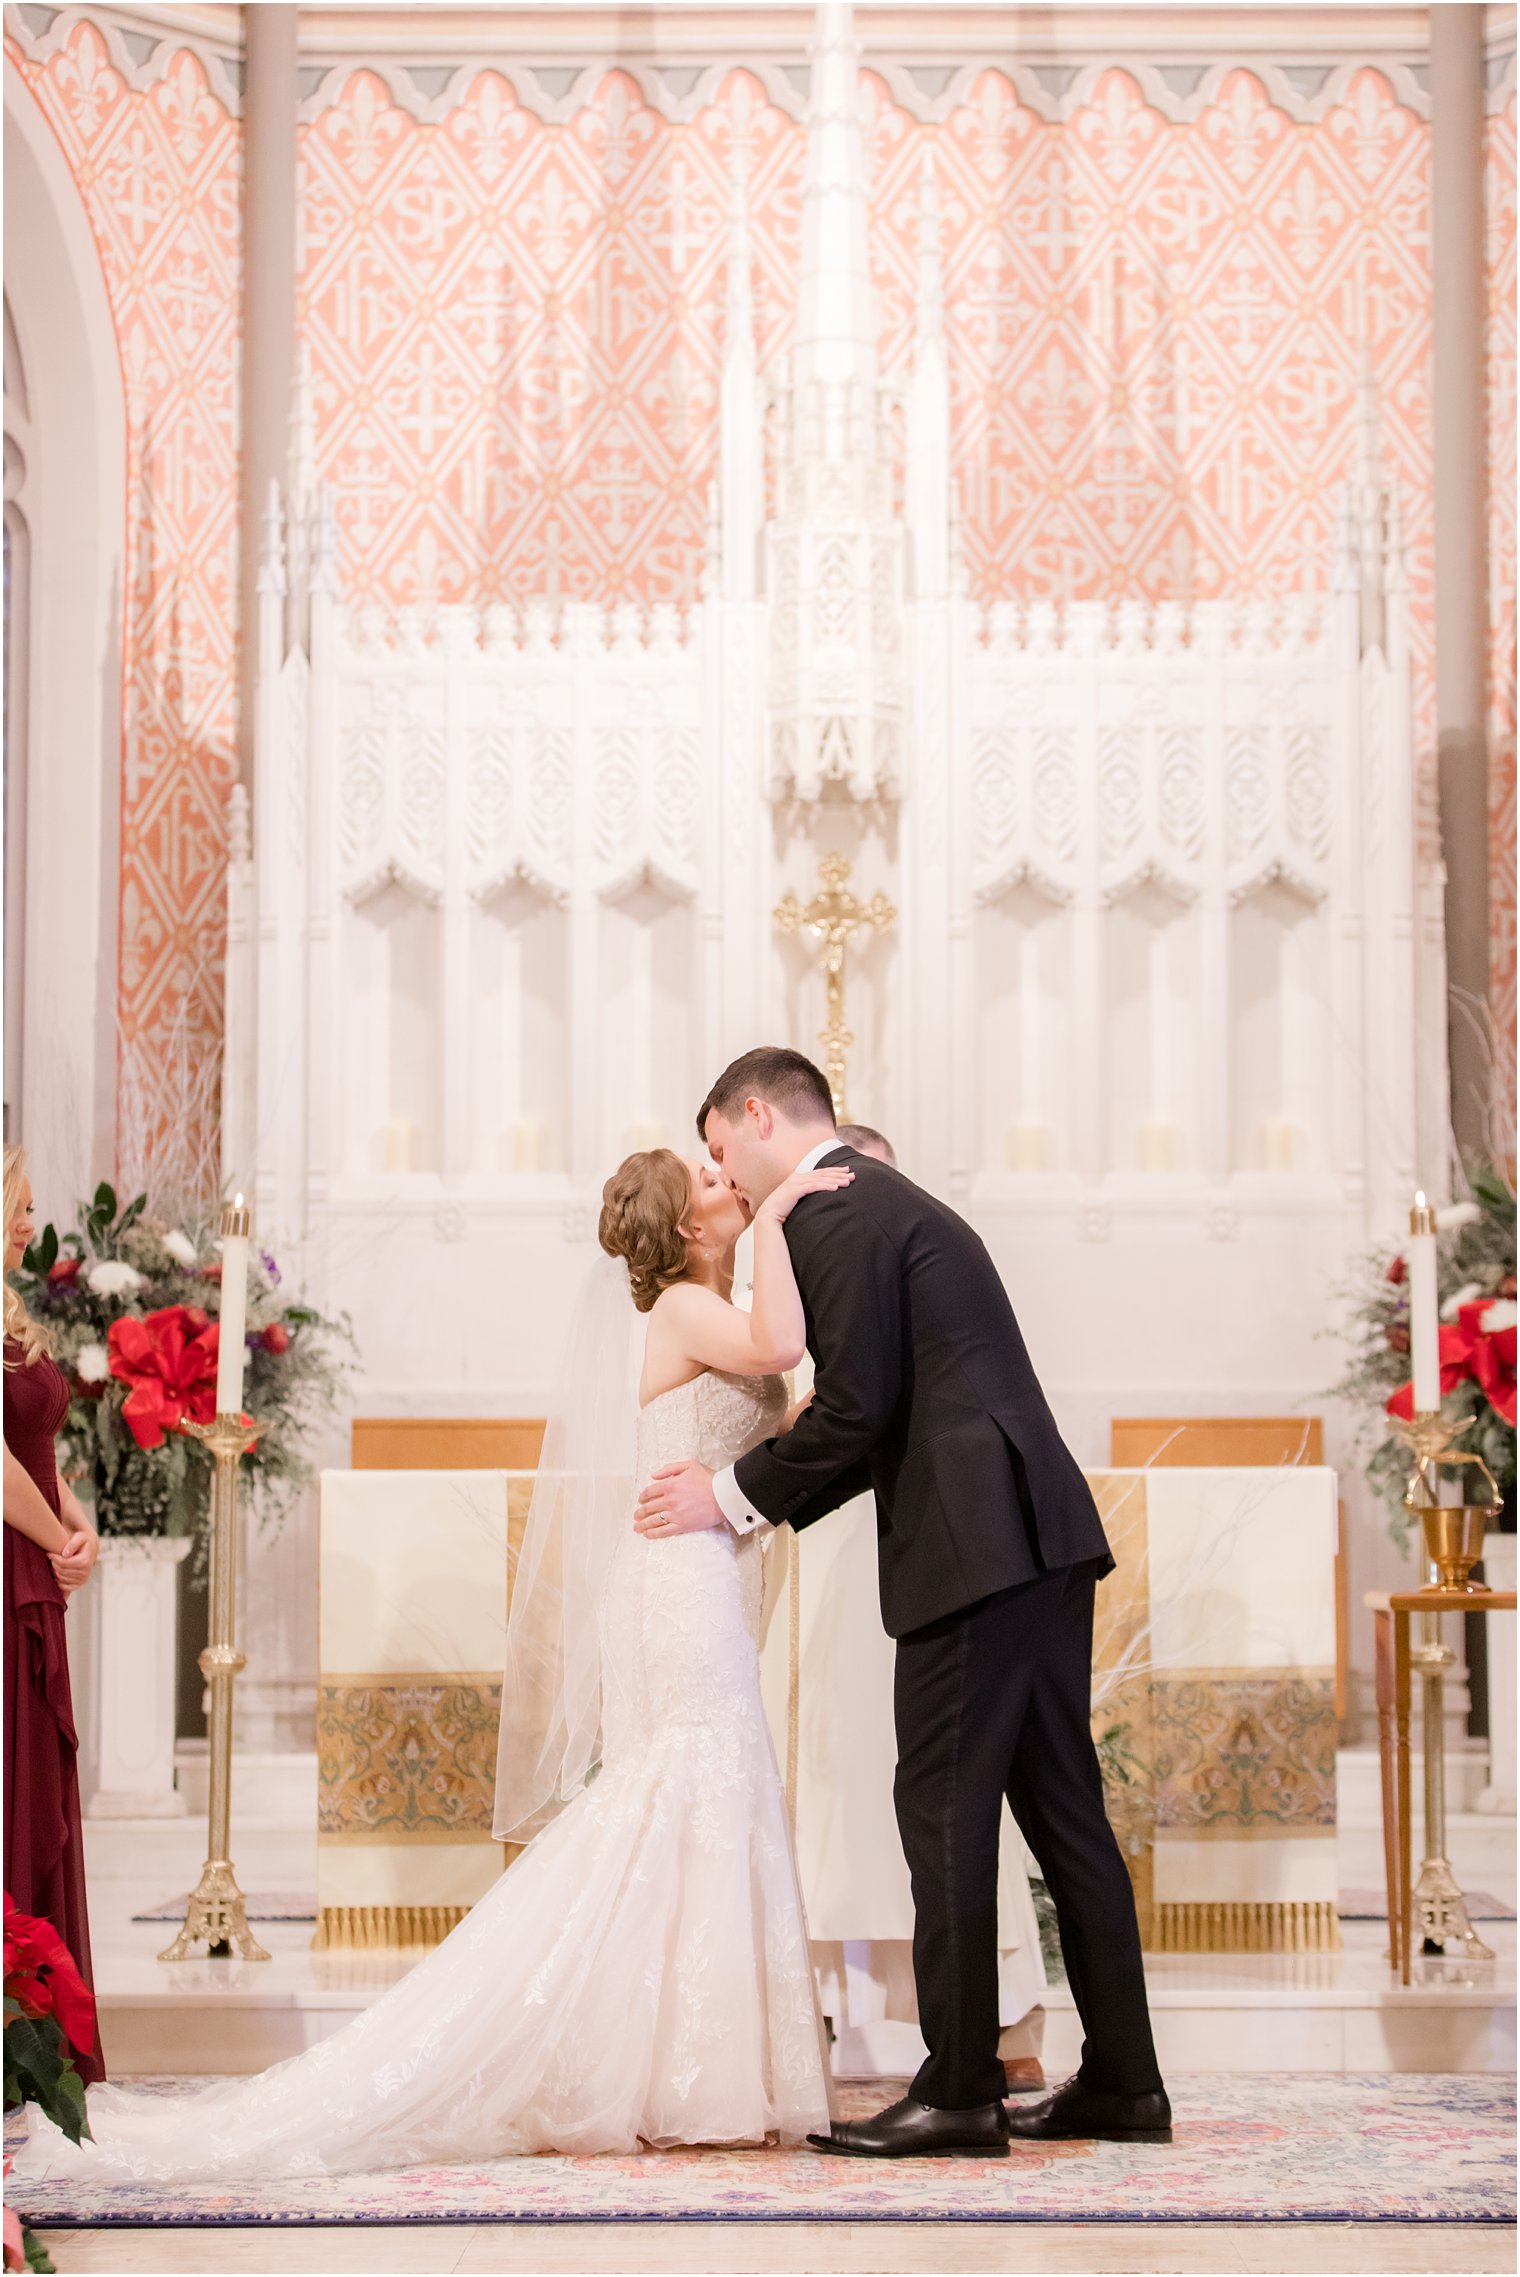 Bride and groom's first kiss during wedding ceremony at St. Peter the Apostle in New Brunswick NJ